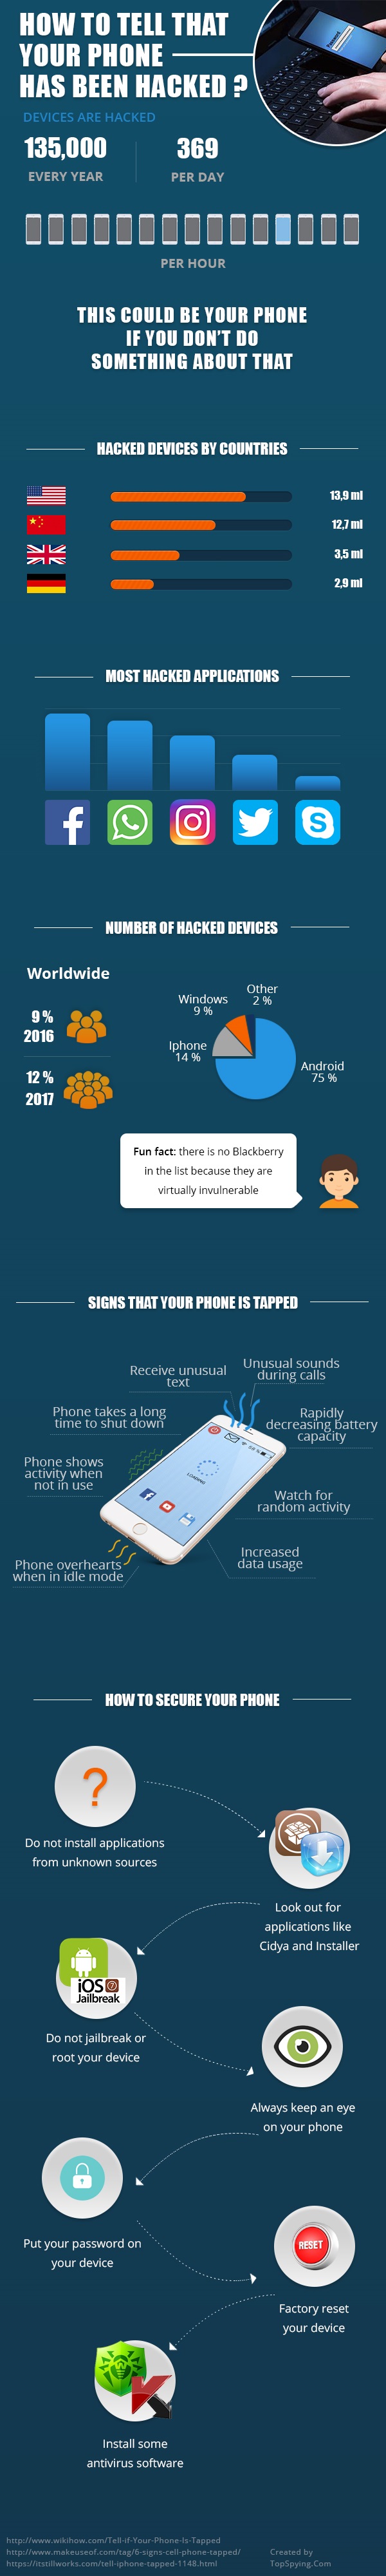 how to tell that your phone is being tapped infographic